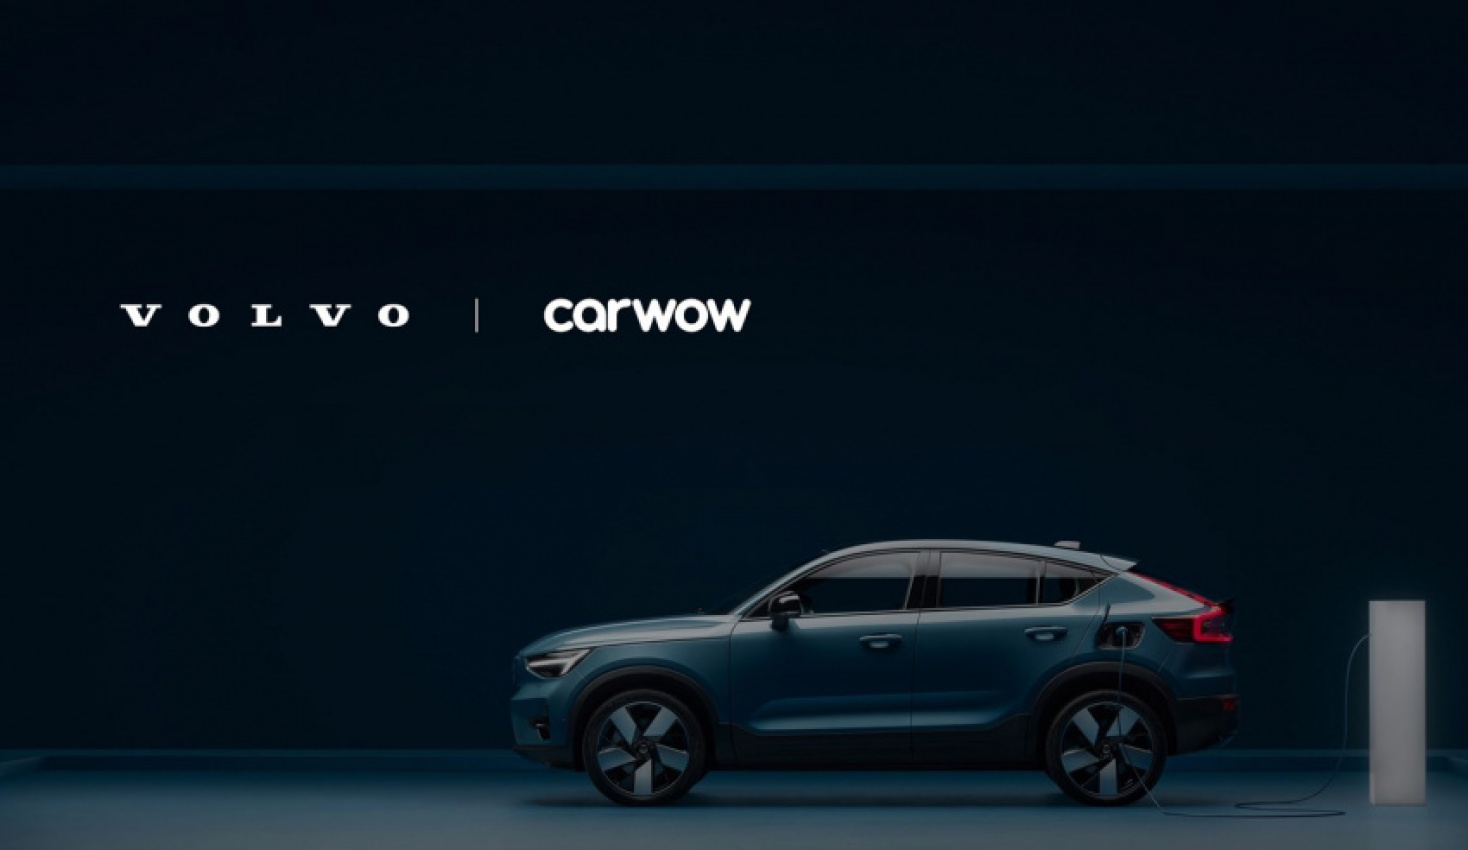 autos, cars, europe, technology, volvo, alexander petrofski, carwow, lex kerssemakers, volvo cars, volvo cars makes strategic investment in european online marketplace carwow